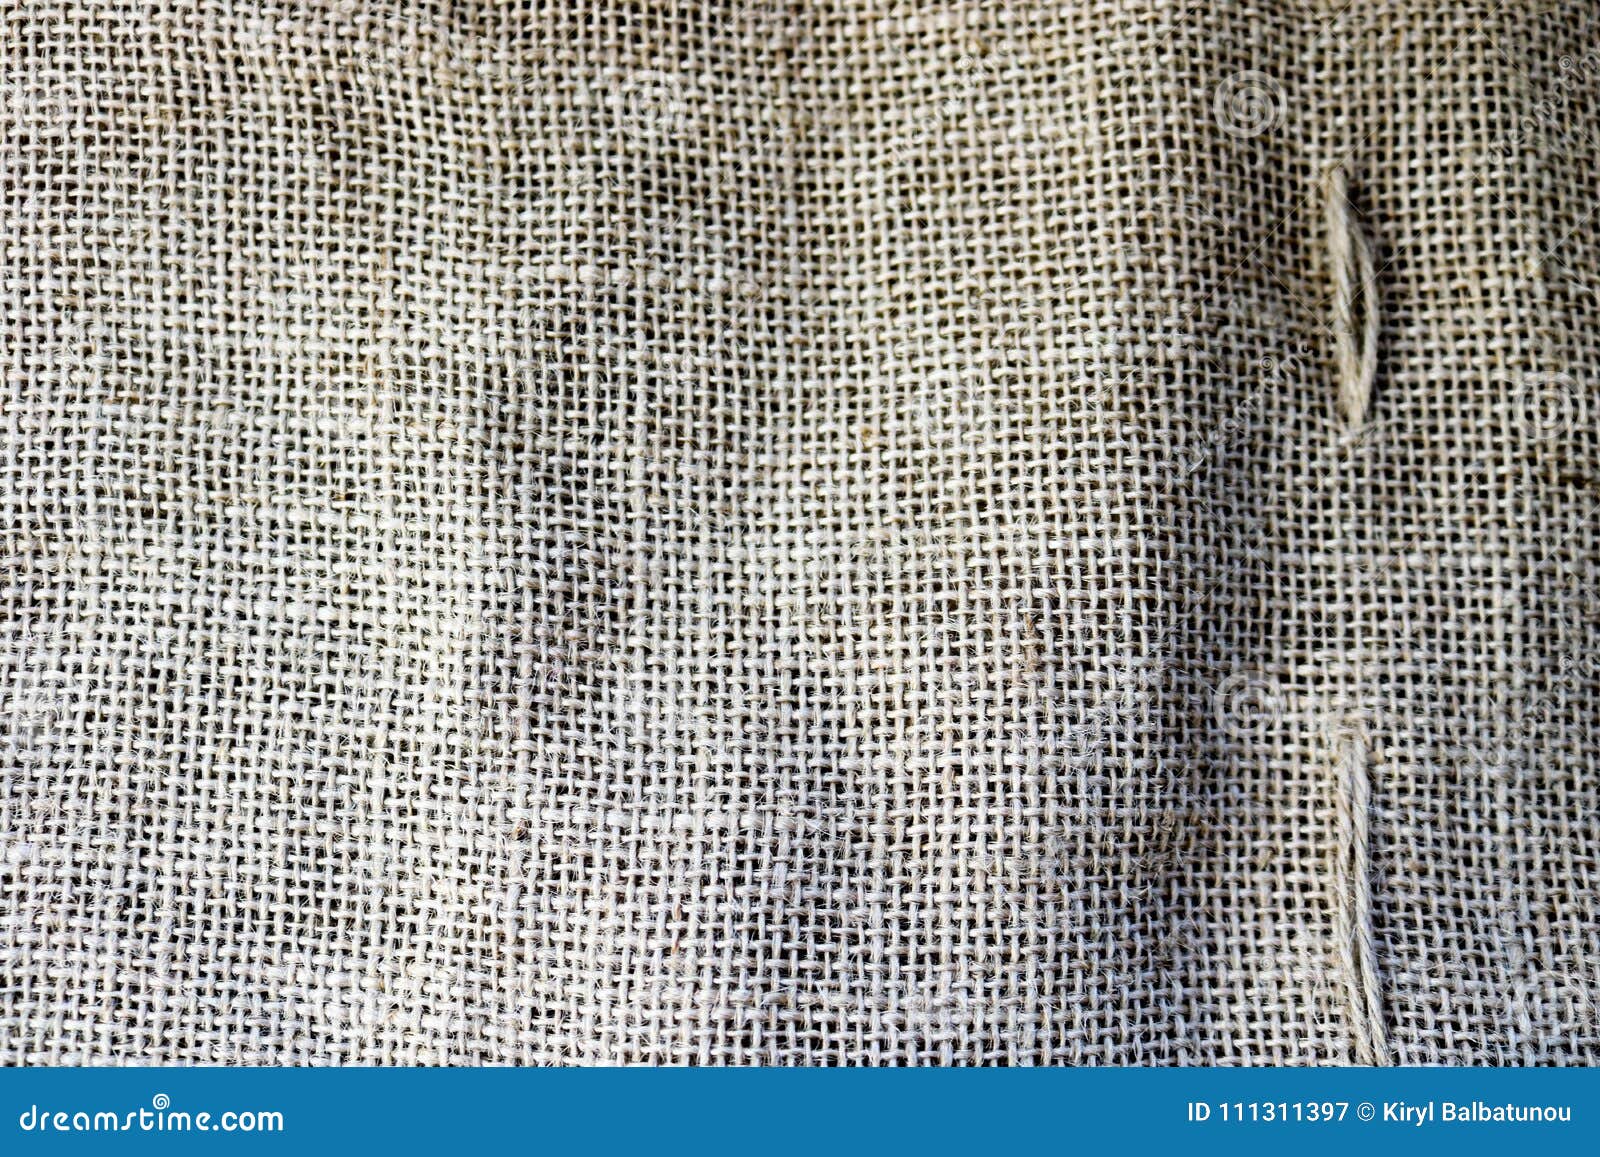 Texture of Brown Old Canvas, Linen Natural Material with a Coarse ...